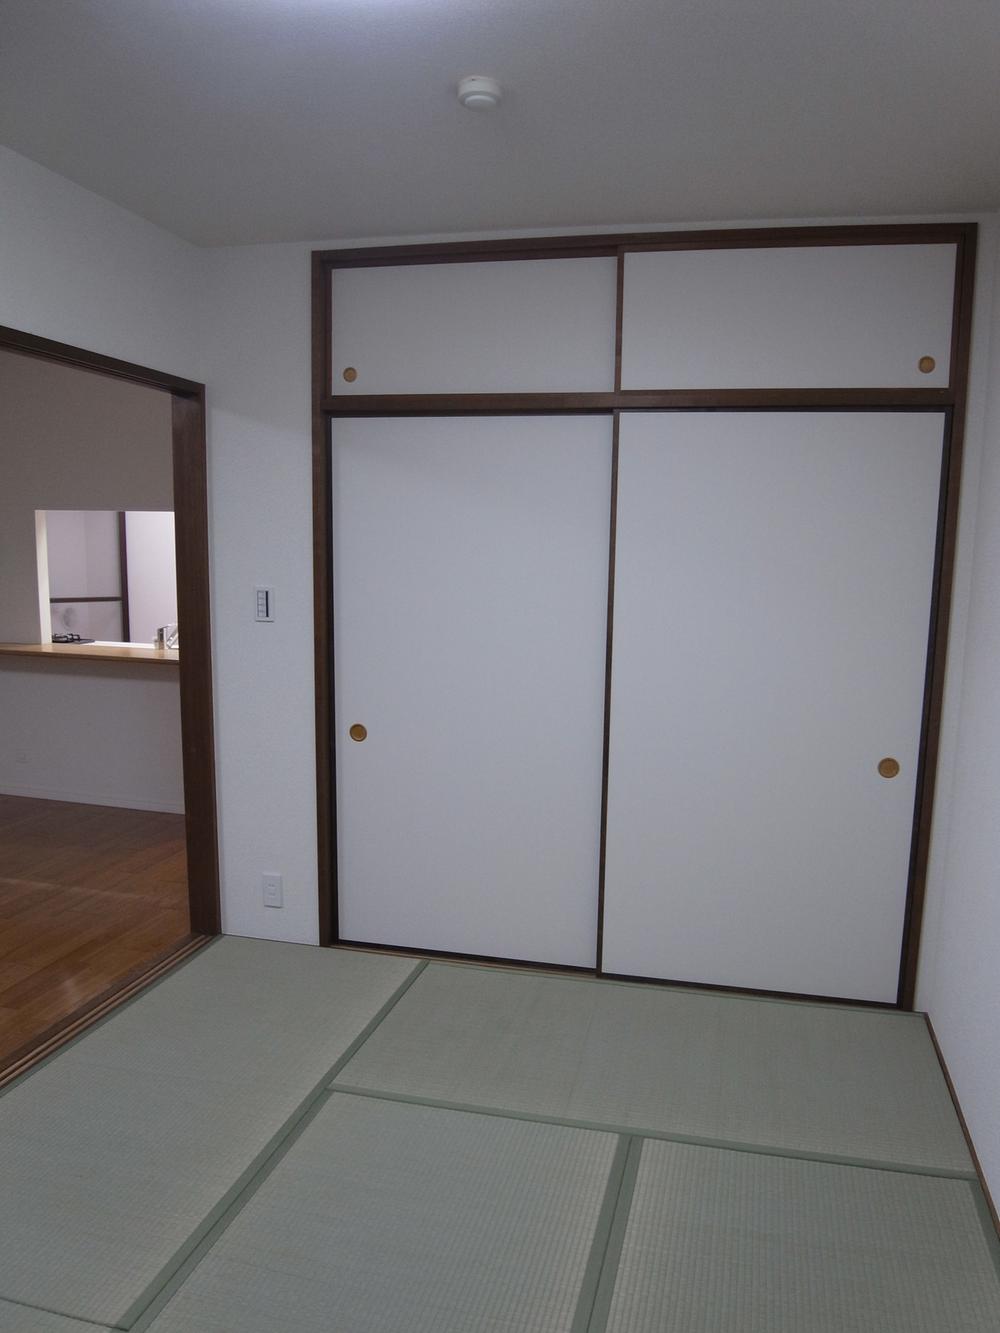 Non-living room. Upper closet with a Japanese-style room